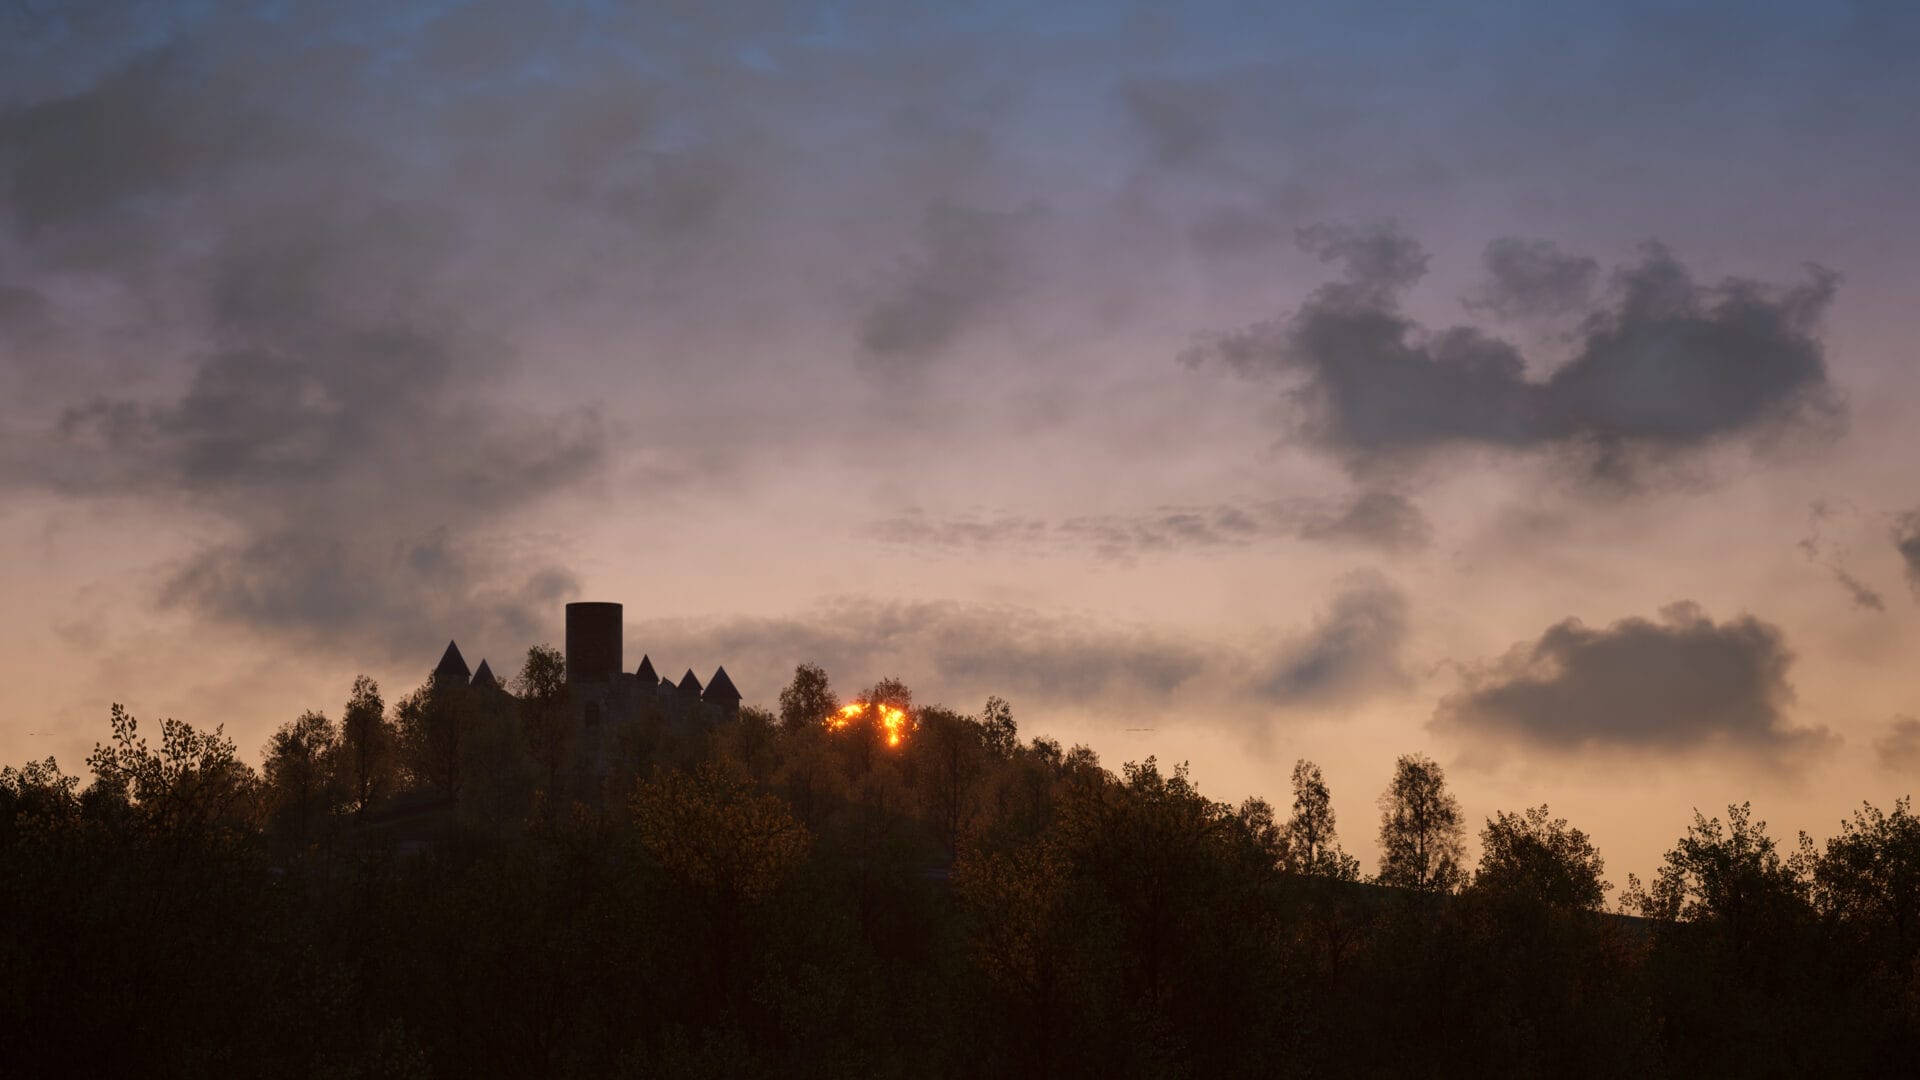 The setting sun casts a golden glow over the Nürburgring 24h circuit, with the iconic castle in the background, creating a picturesque scene in Assetto Corsa Competizione